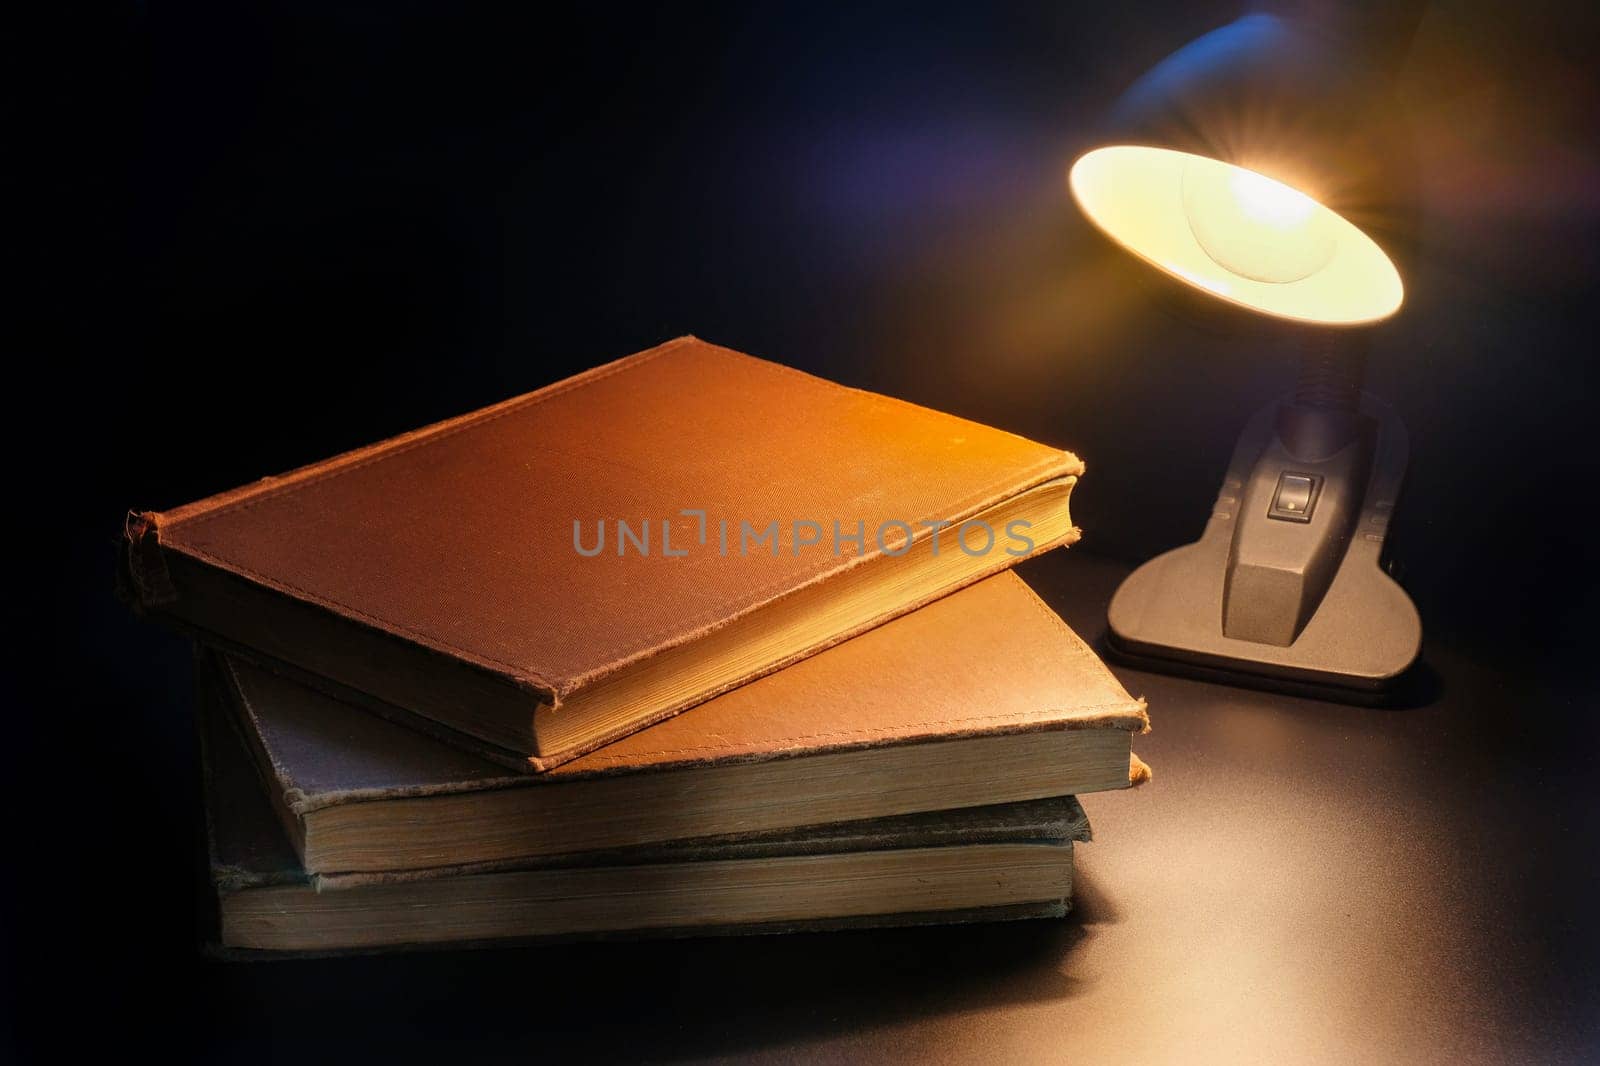 Table lamp lighting books on the table. Education concept by Shablovskyistock